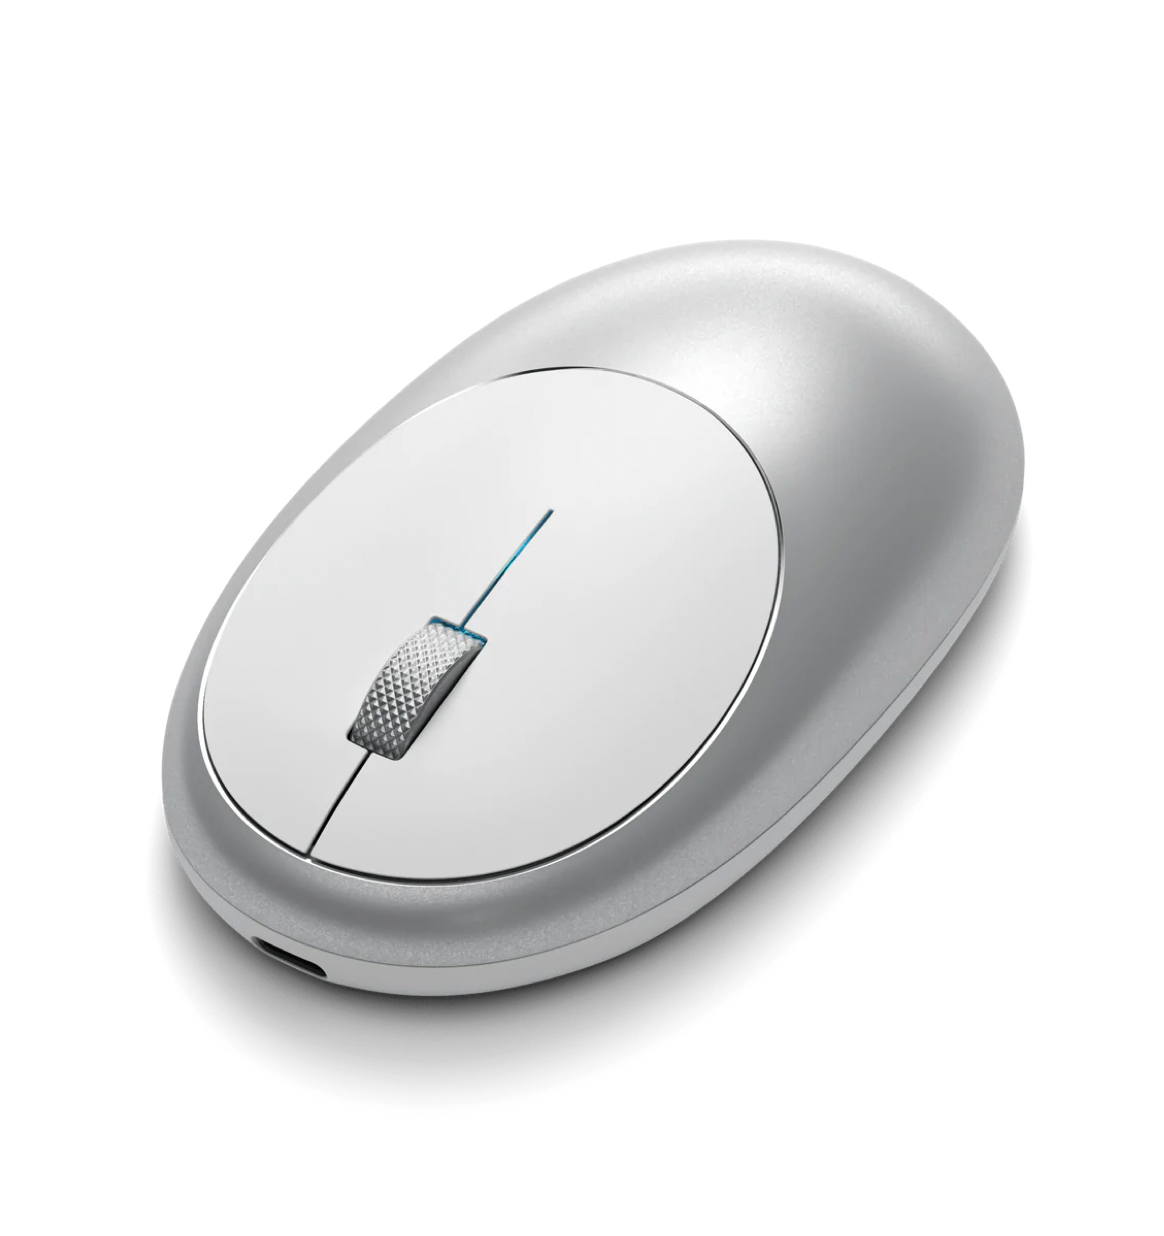 Satechi M1 Bluetooth Wireless Mouse Silver